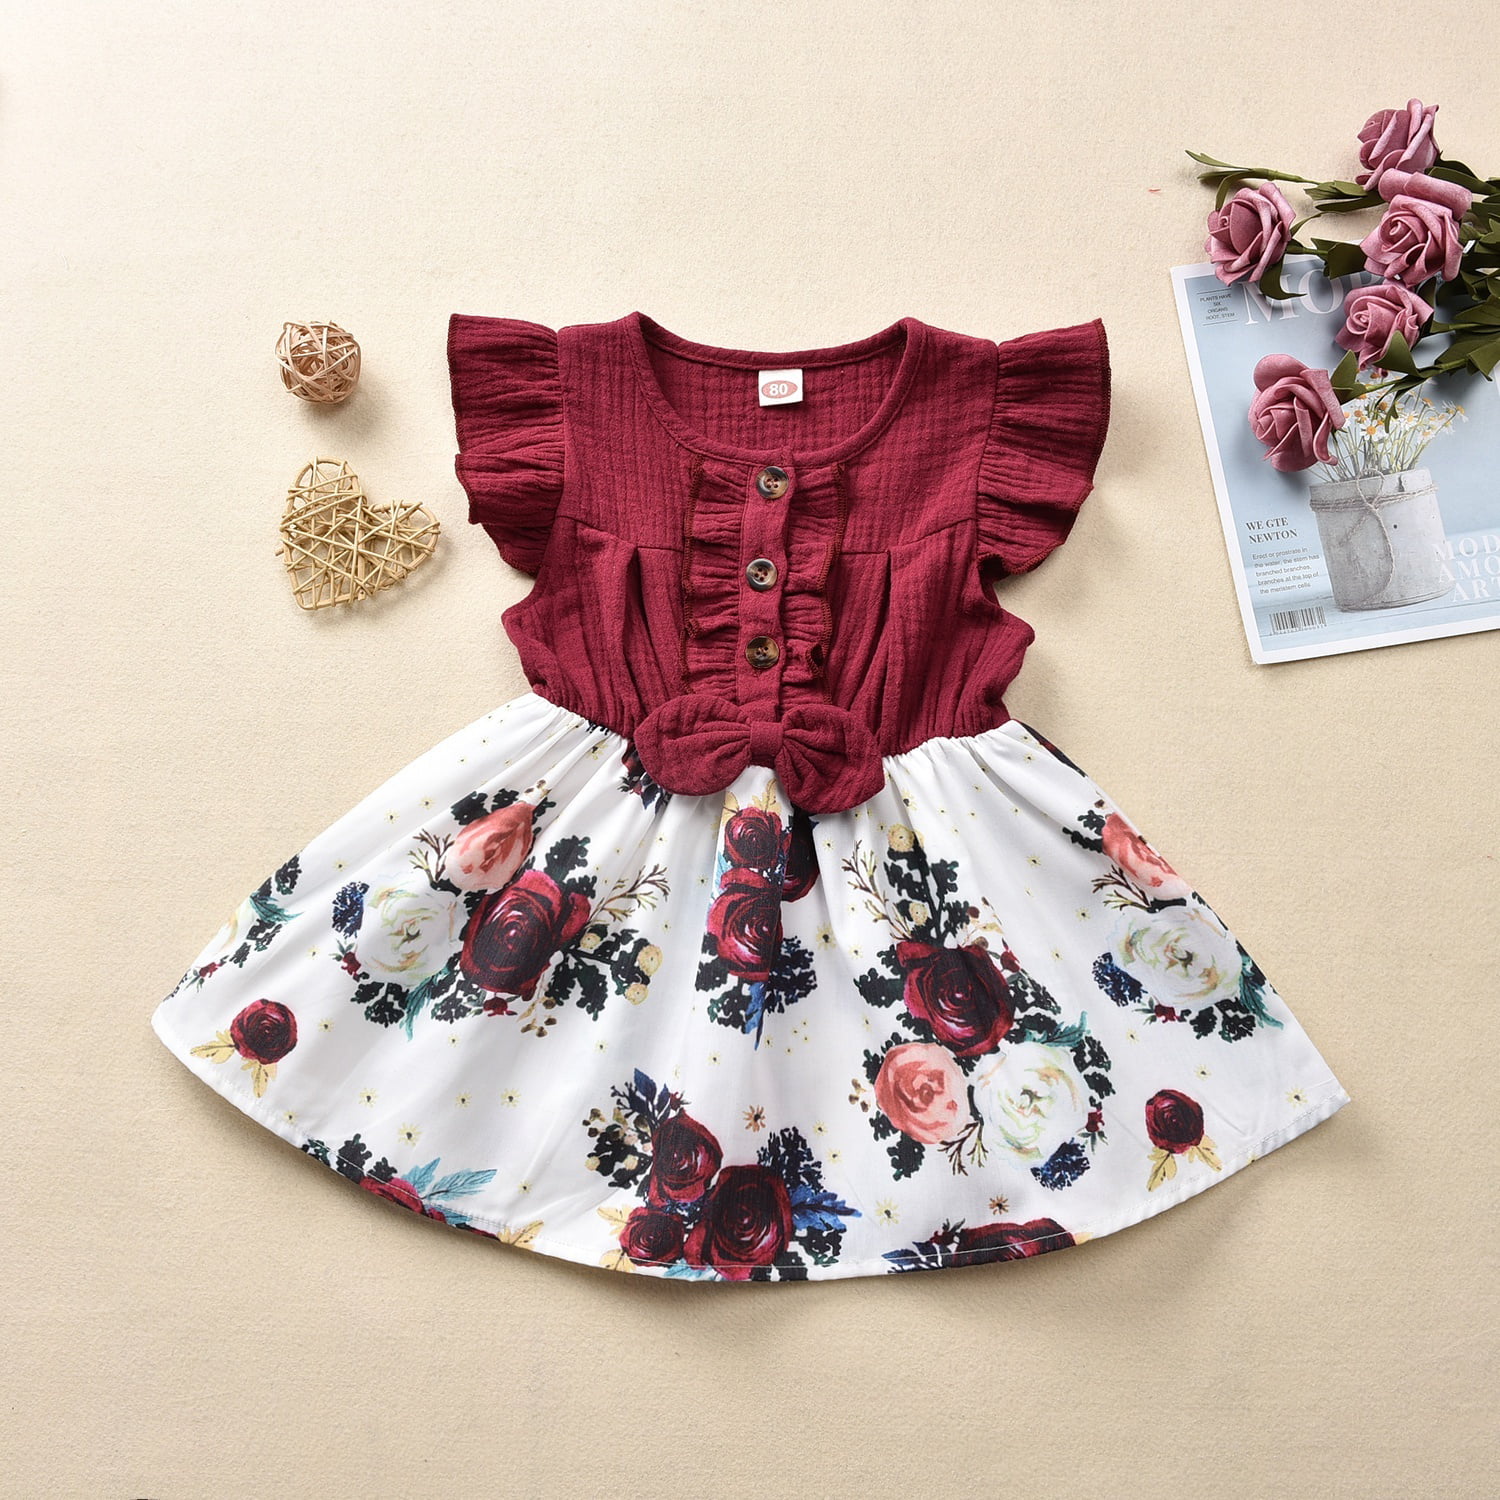 Girls Patchwork Floral Sun Dress Kids Cotton Summer Dresses New Age 3-10 Years 